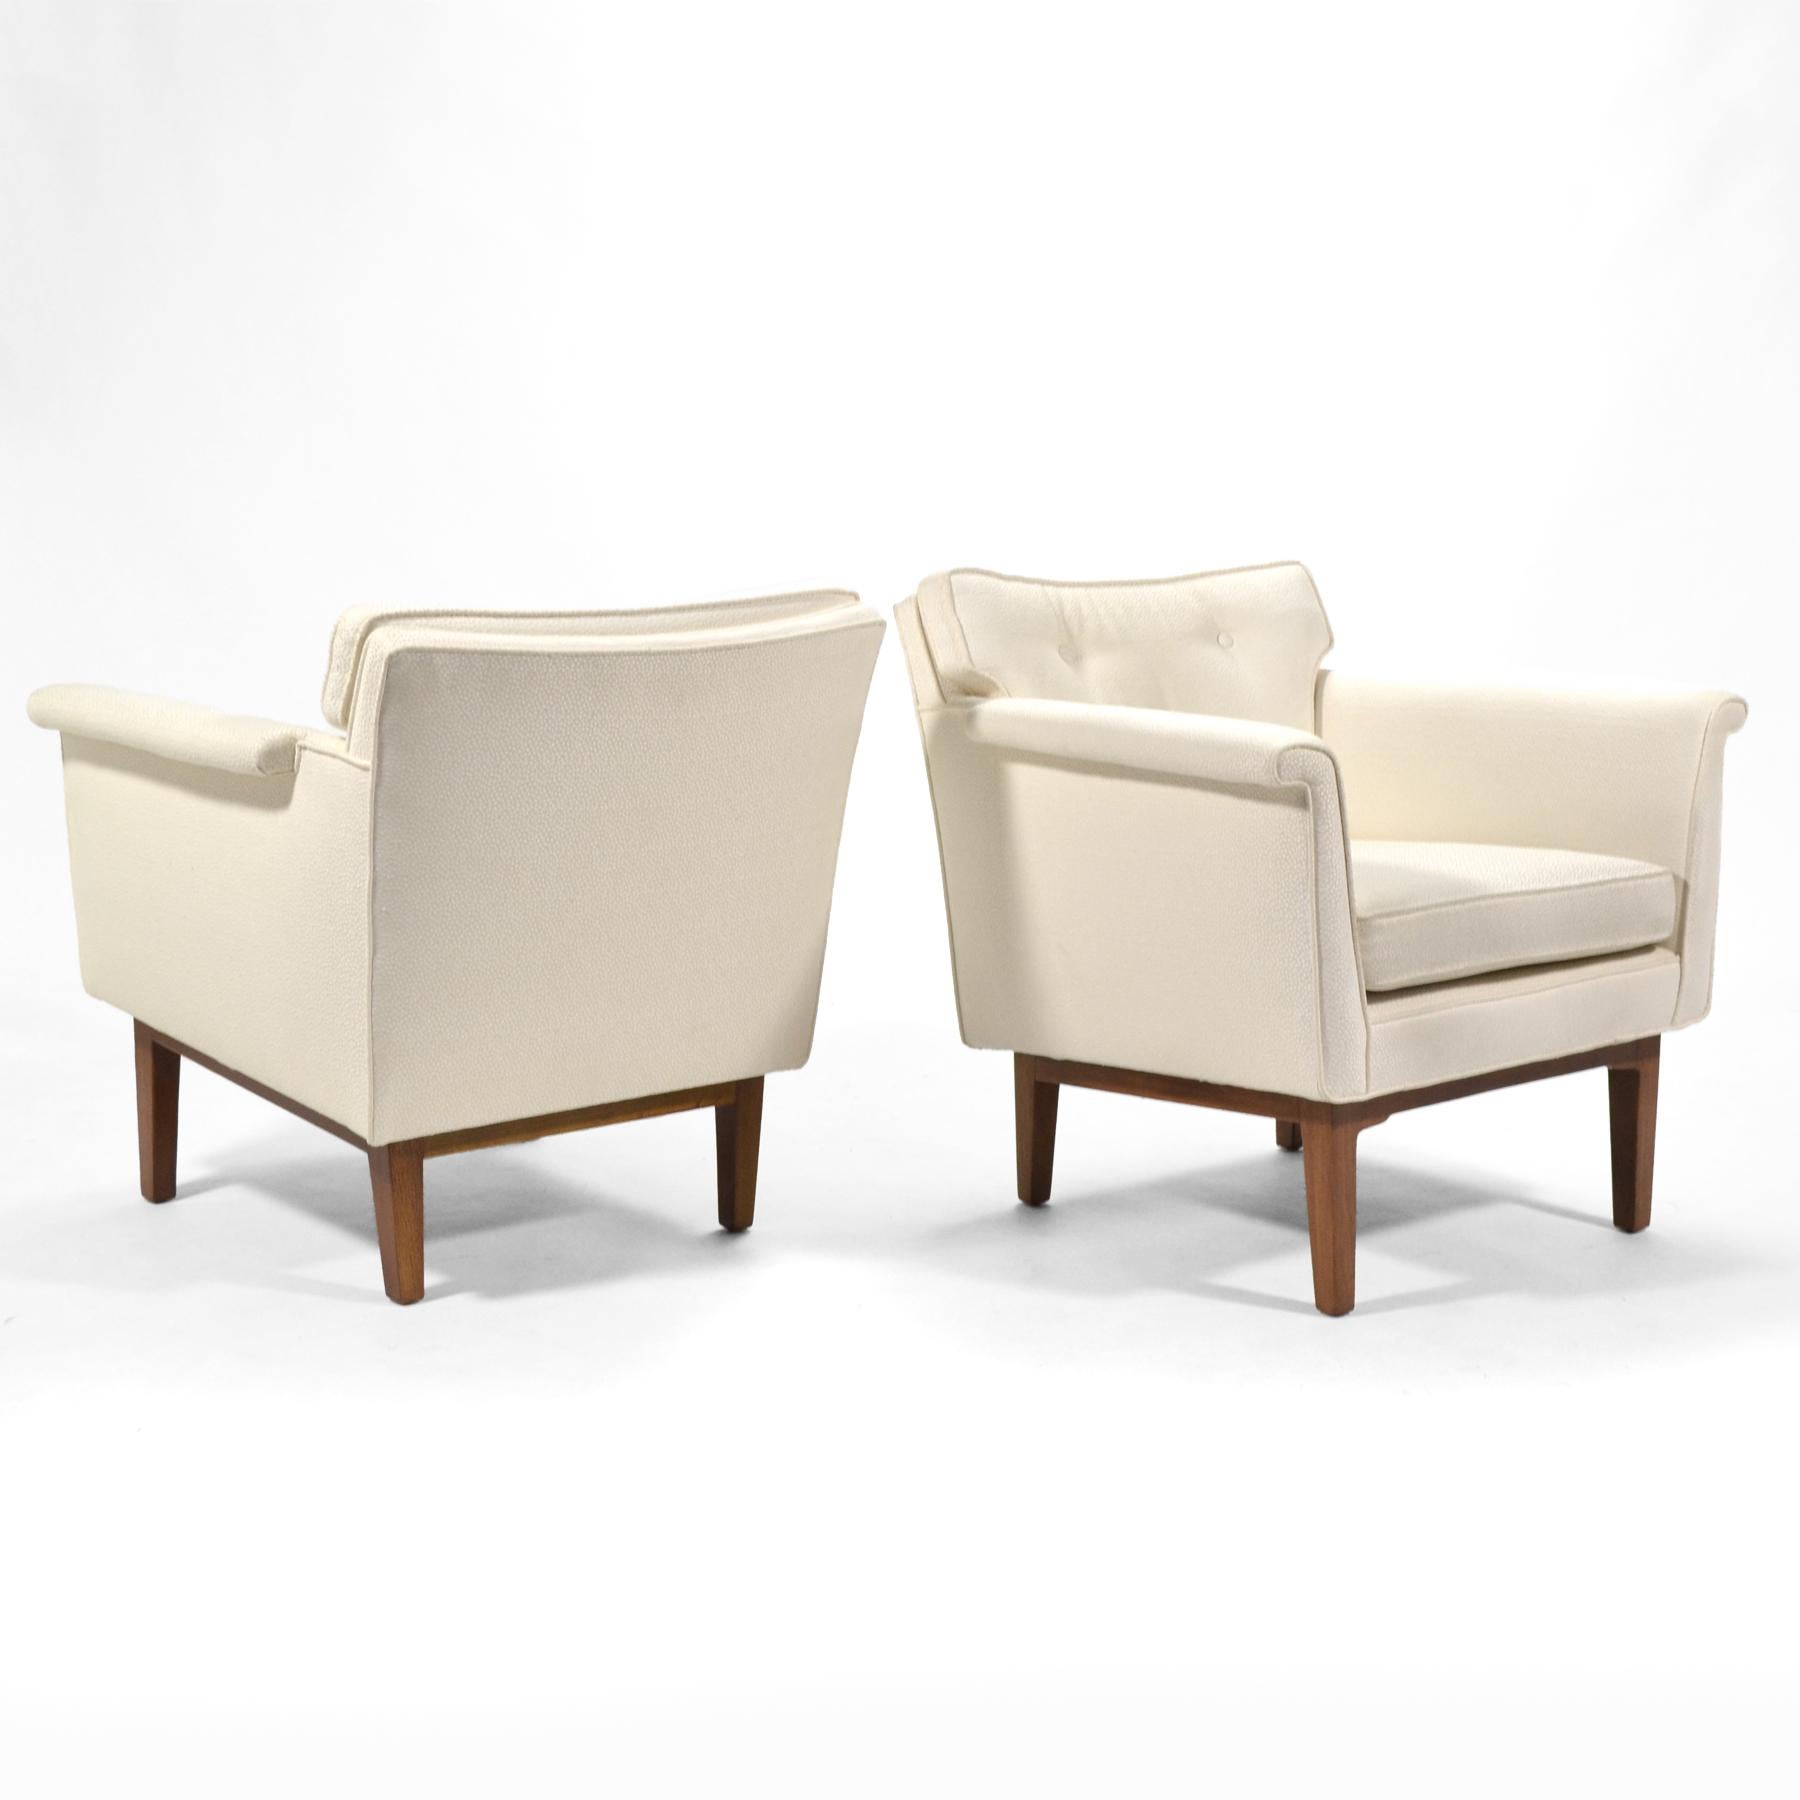 Mid-20th Century Edward Wormley Pair of Lounge Chairs by Dunbar